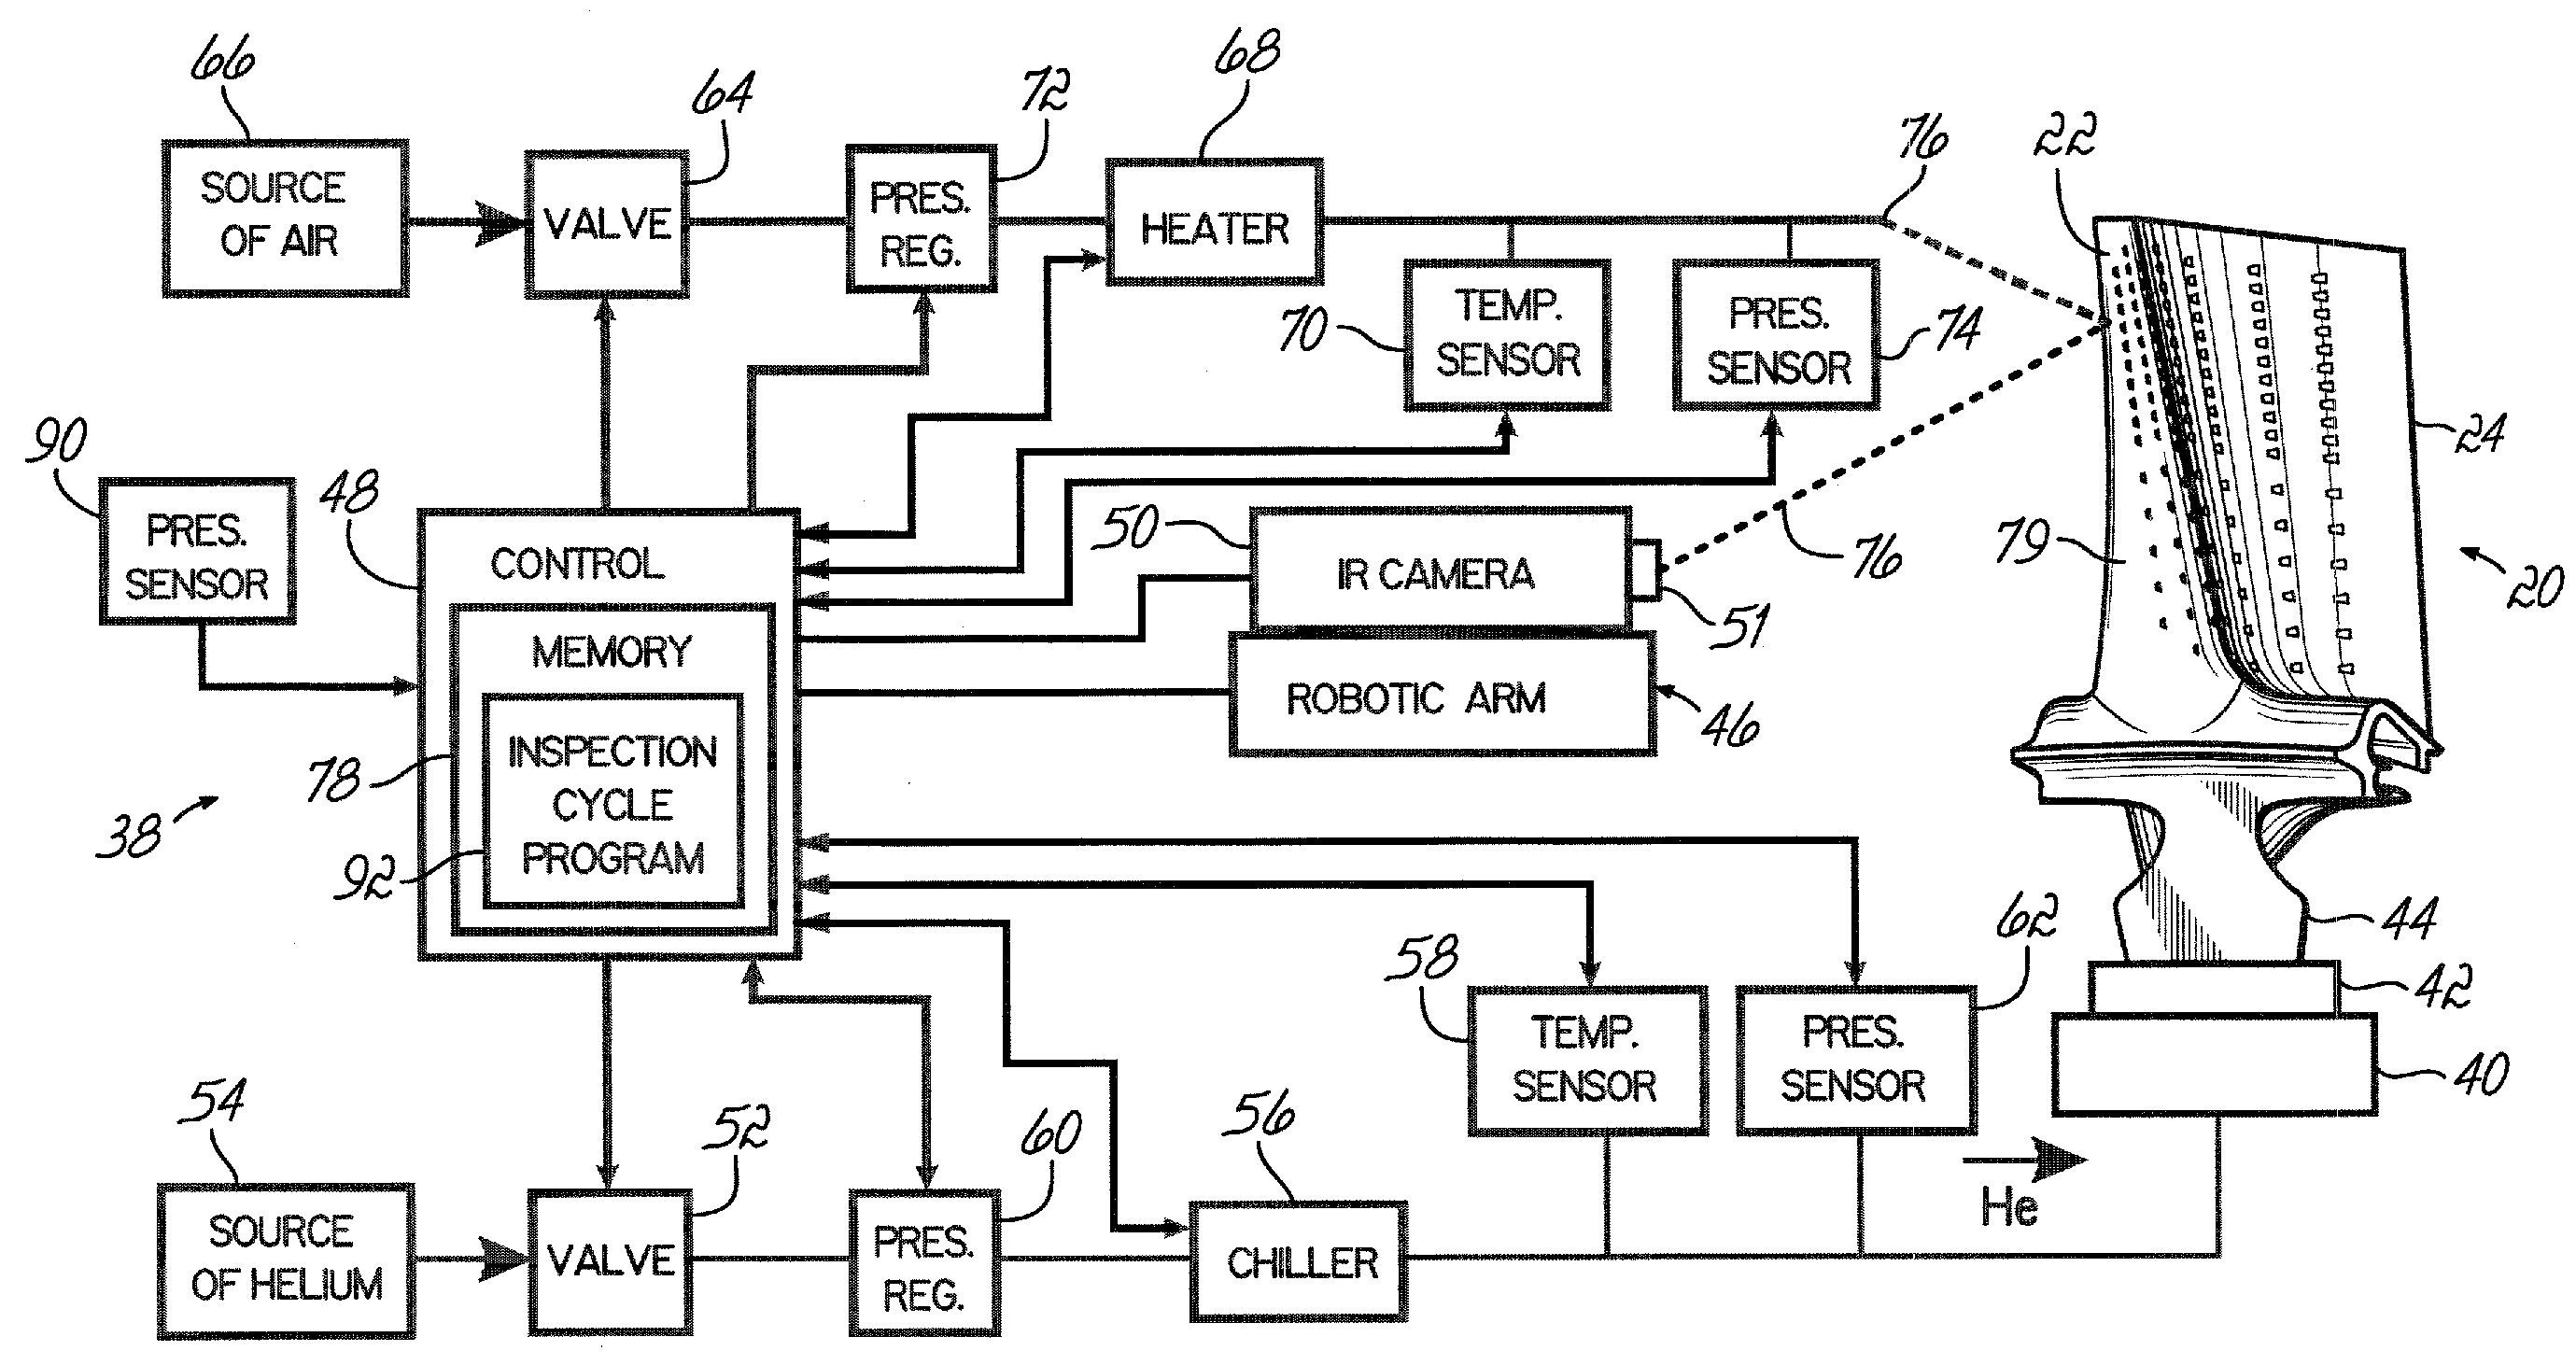 Apparatus and Method for Analyzing Relative Outward Flow Characterizations of Fabricated Features